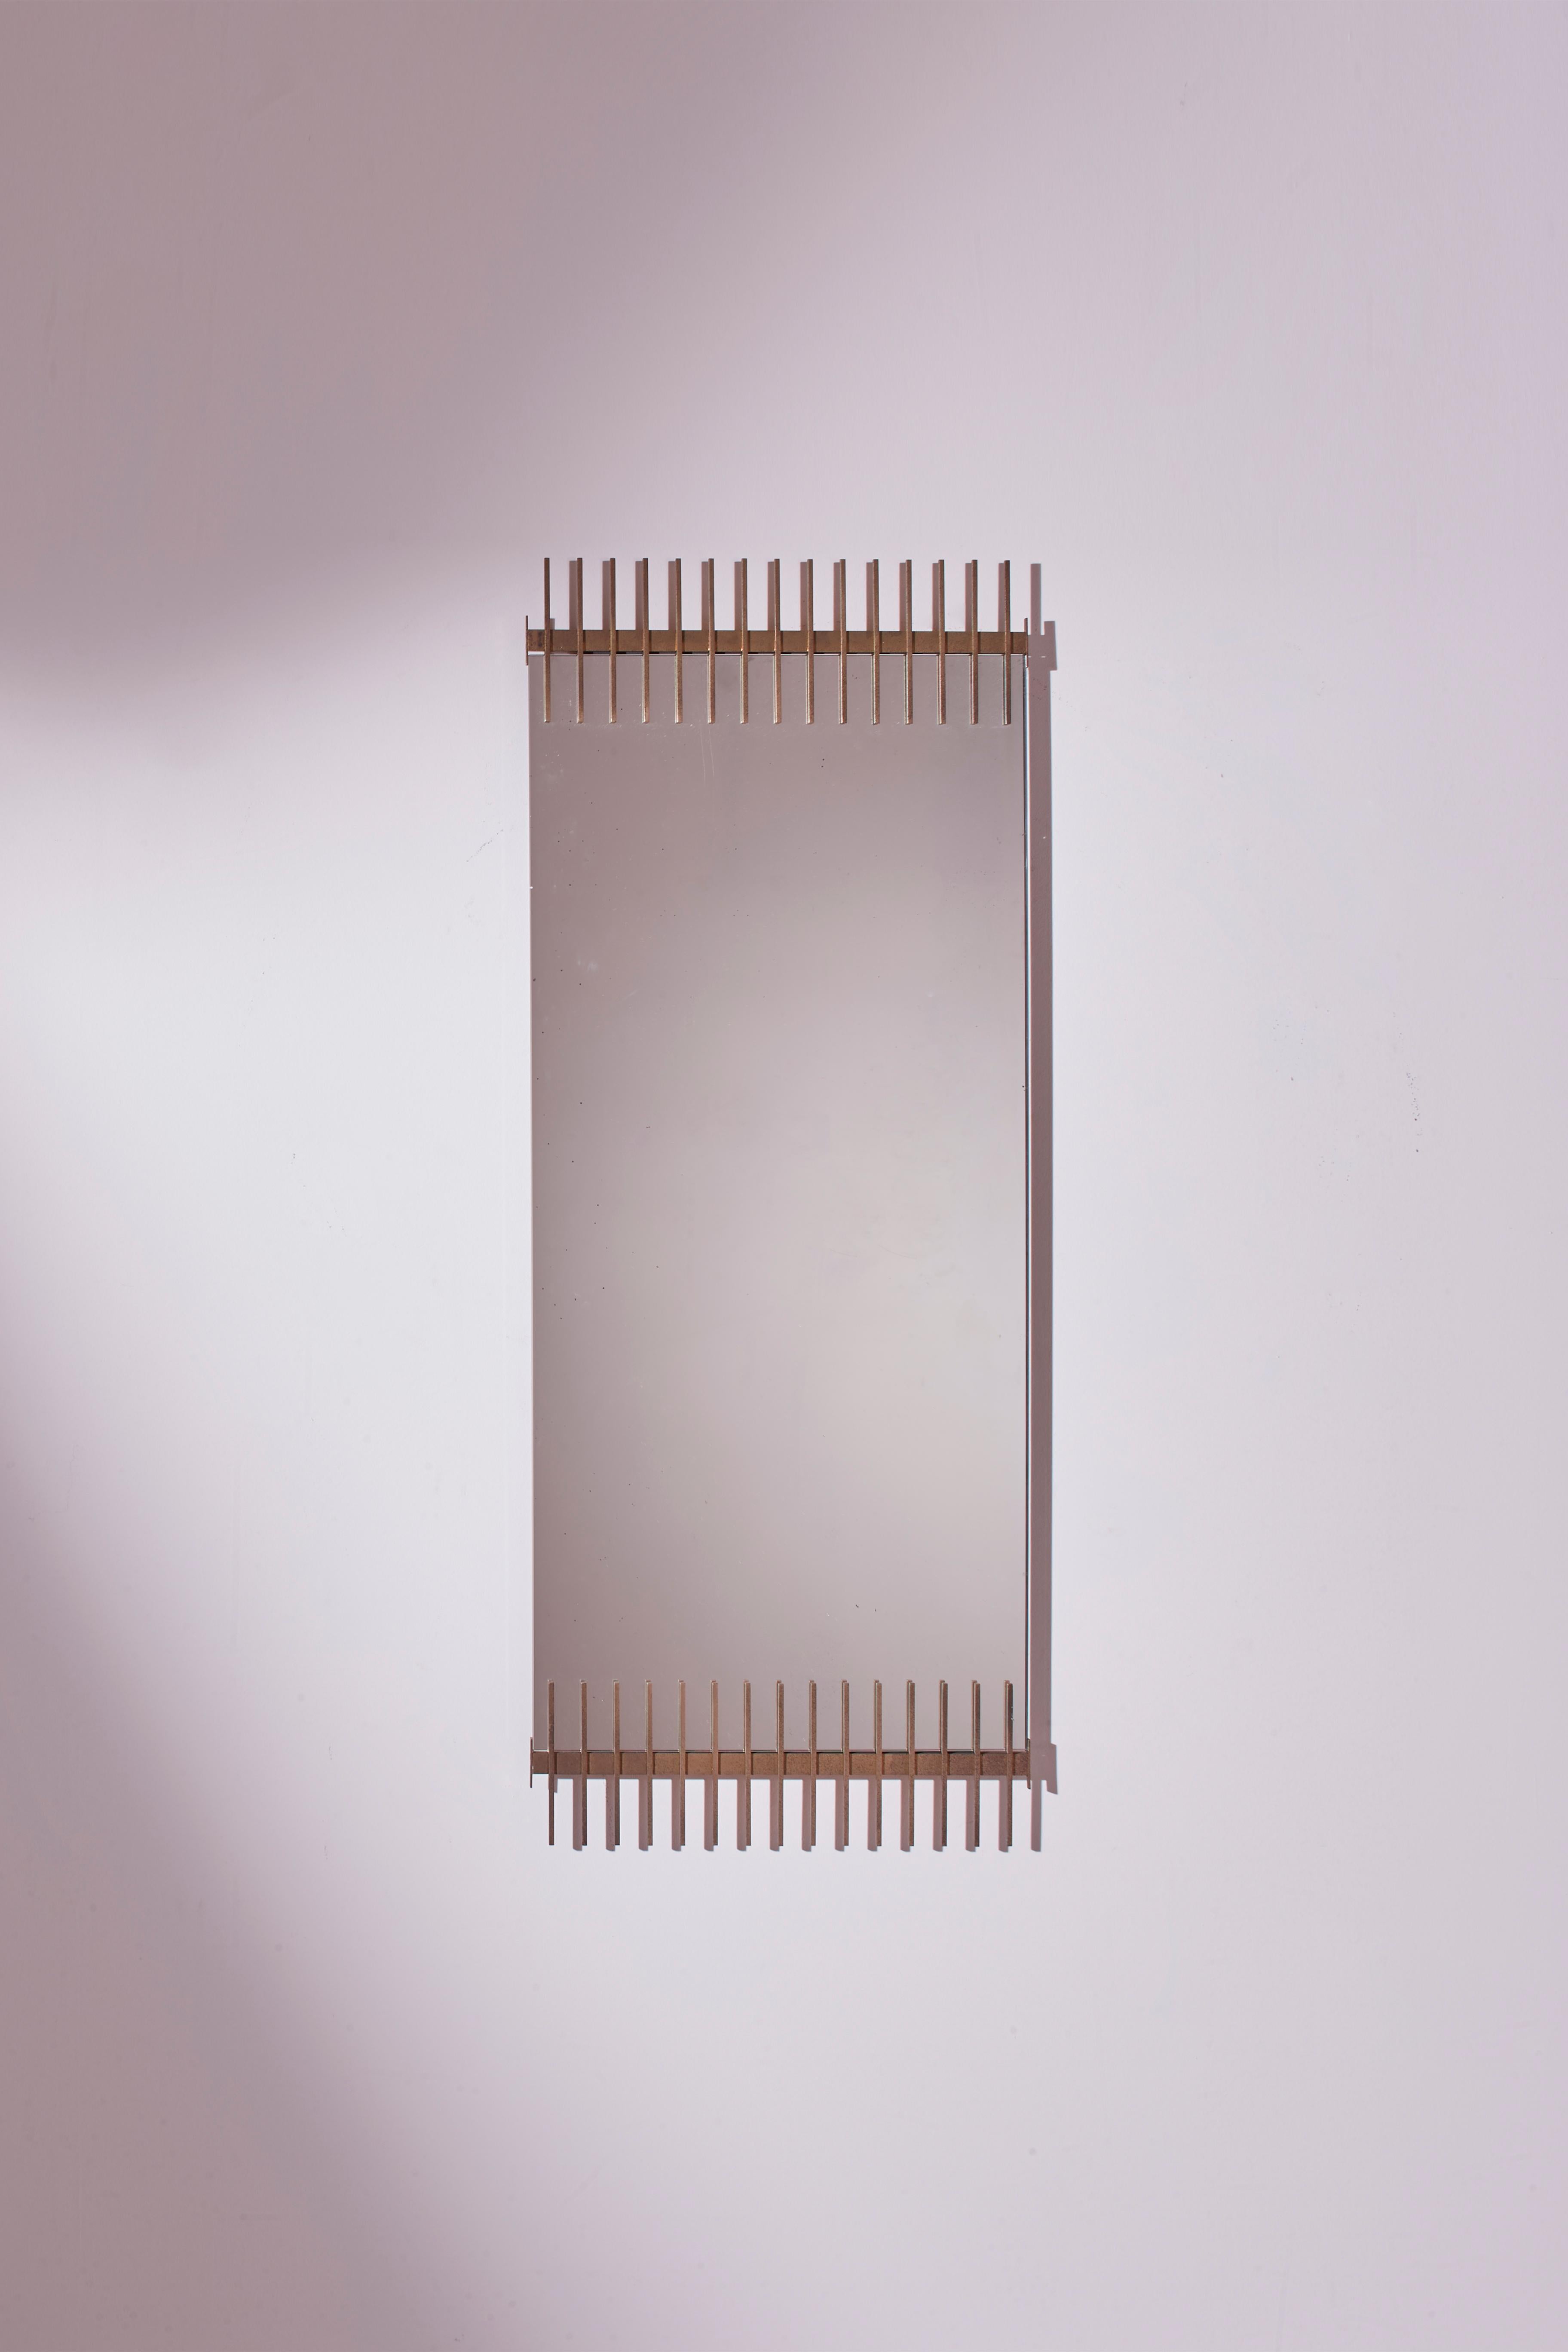 An elegant and original wall mirror, designed by Ettore Sottsass and produced by Santambrogio e De Berti in Lissone in the 1958.

Crafted with exquisite materials such as brass and glass resting on a black enameled metal structure at the back, this